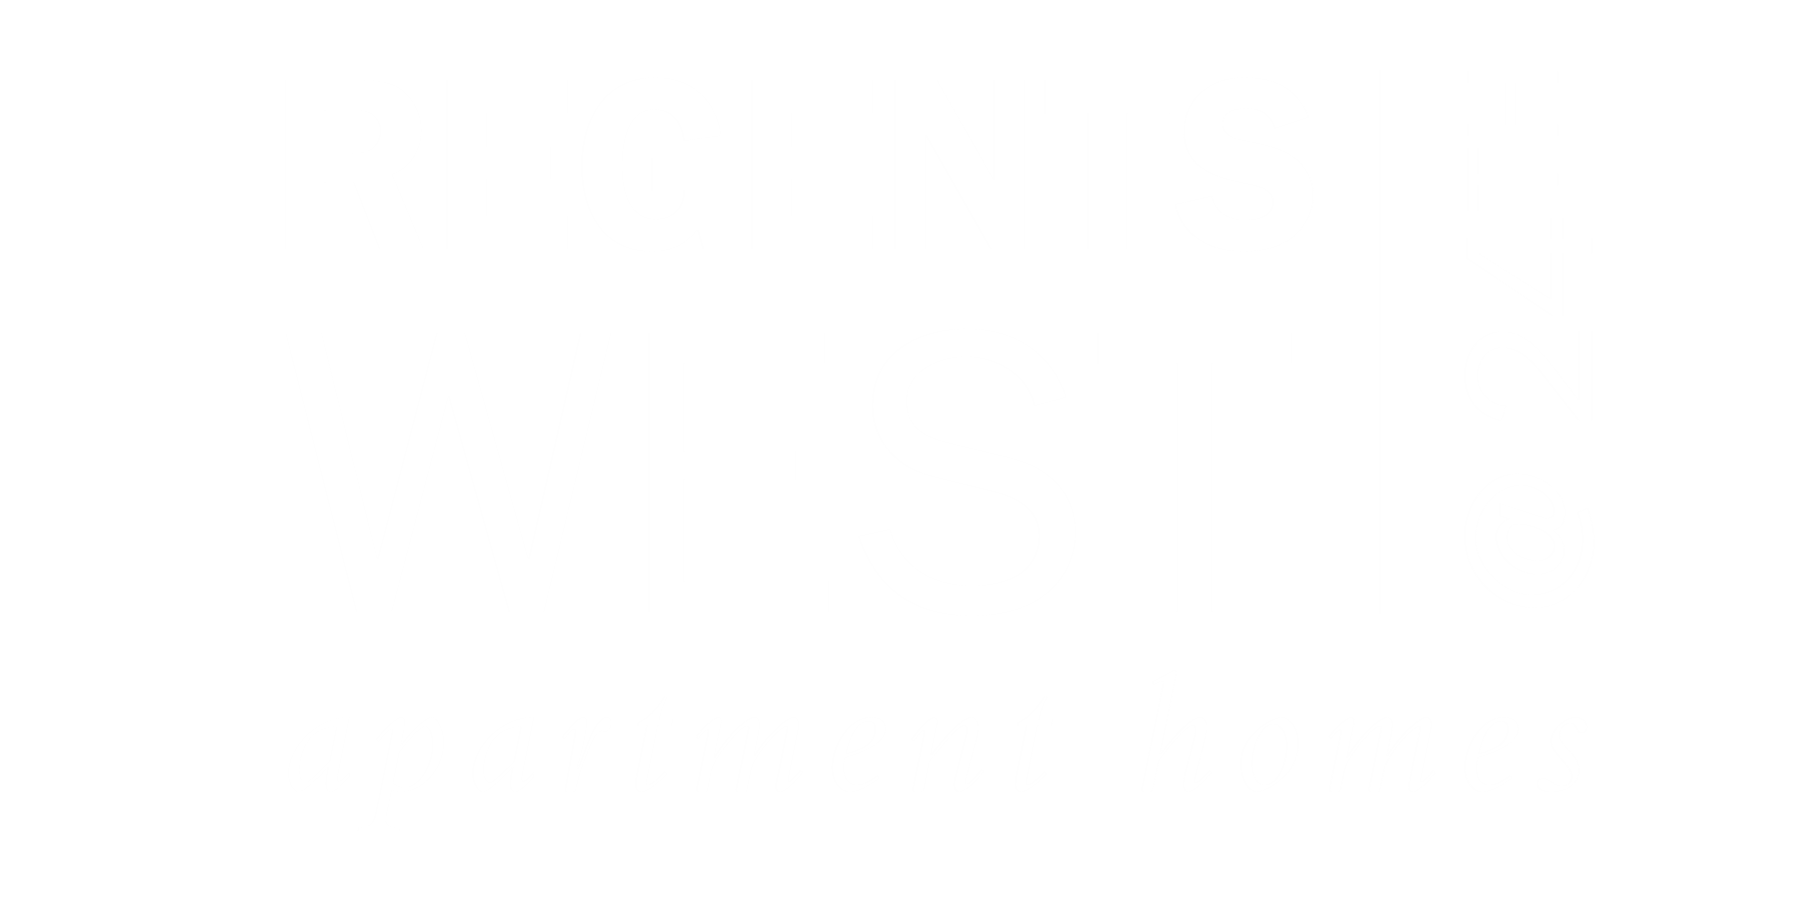 Regents West at 24th white logo.